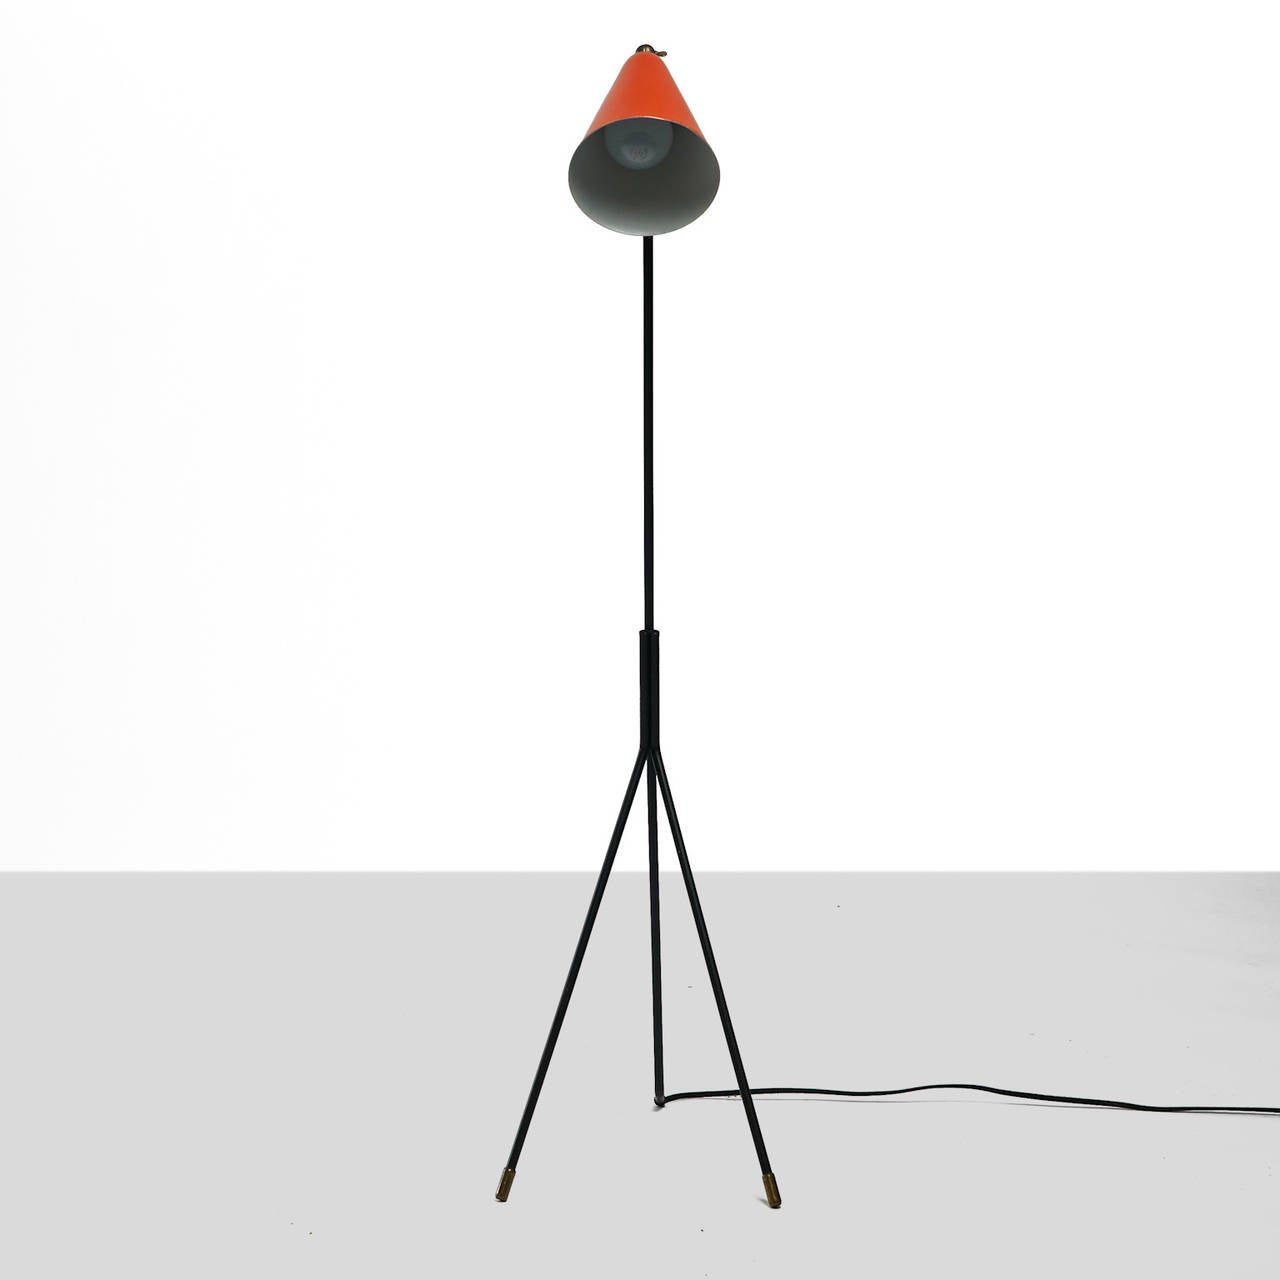 A floor lamp by Svend Aage Holm Sorensen. Orange lacquered adjustable shade with brass joint. Black lacquered three-leg base with brass caps. Newly rewired.